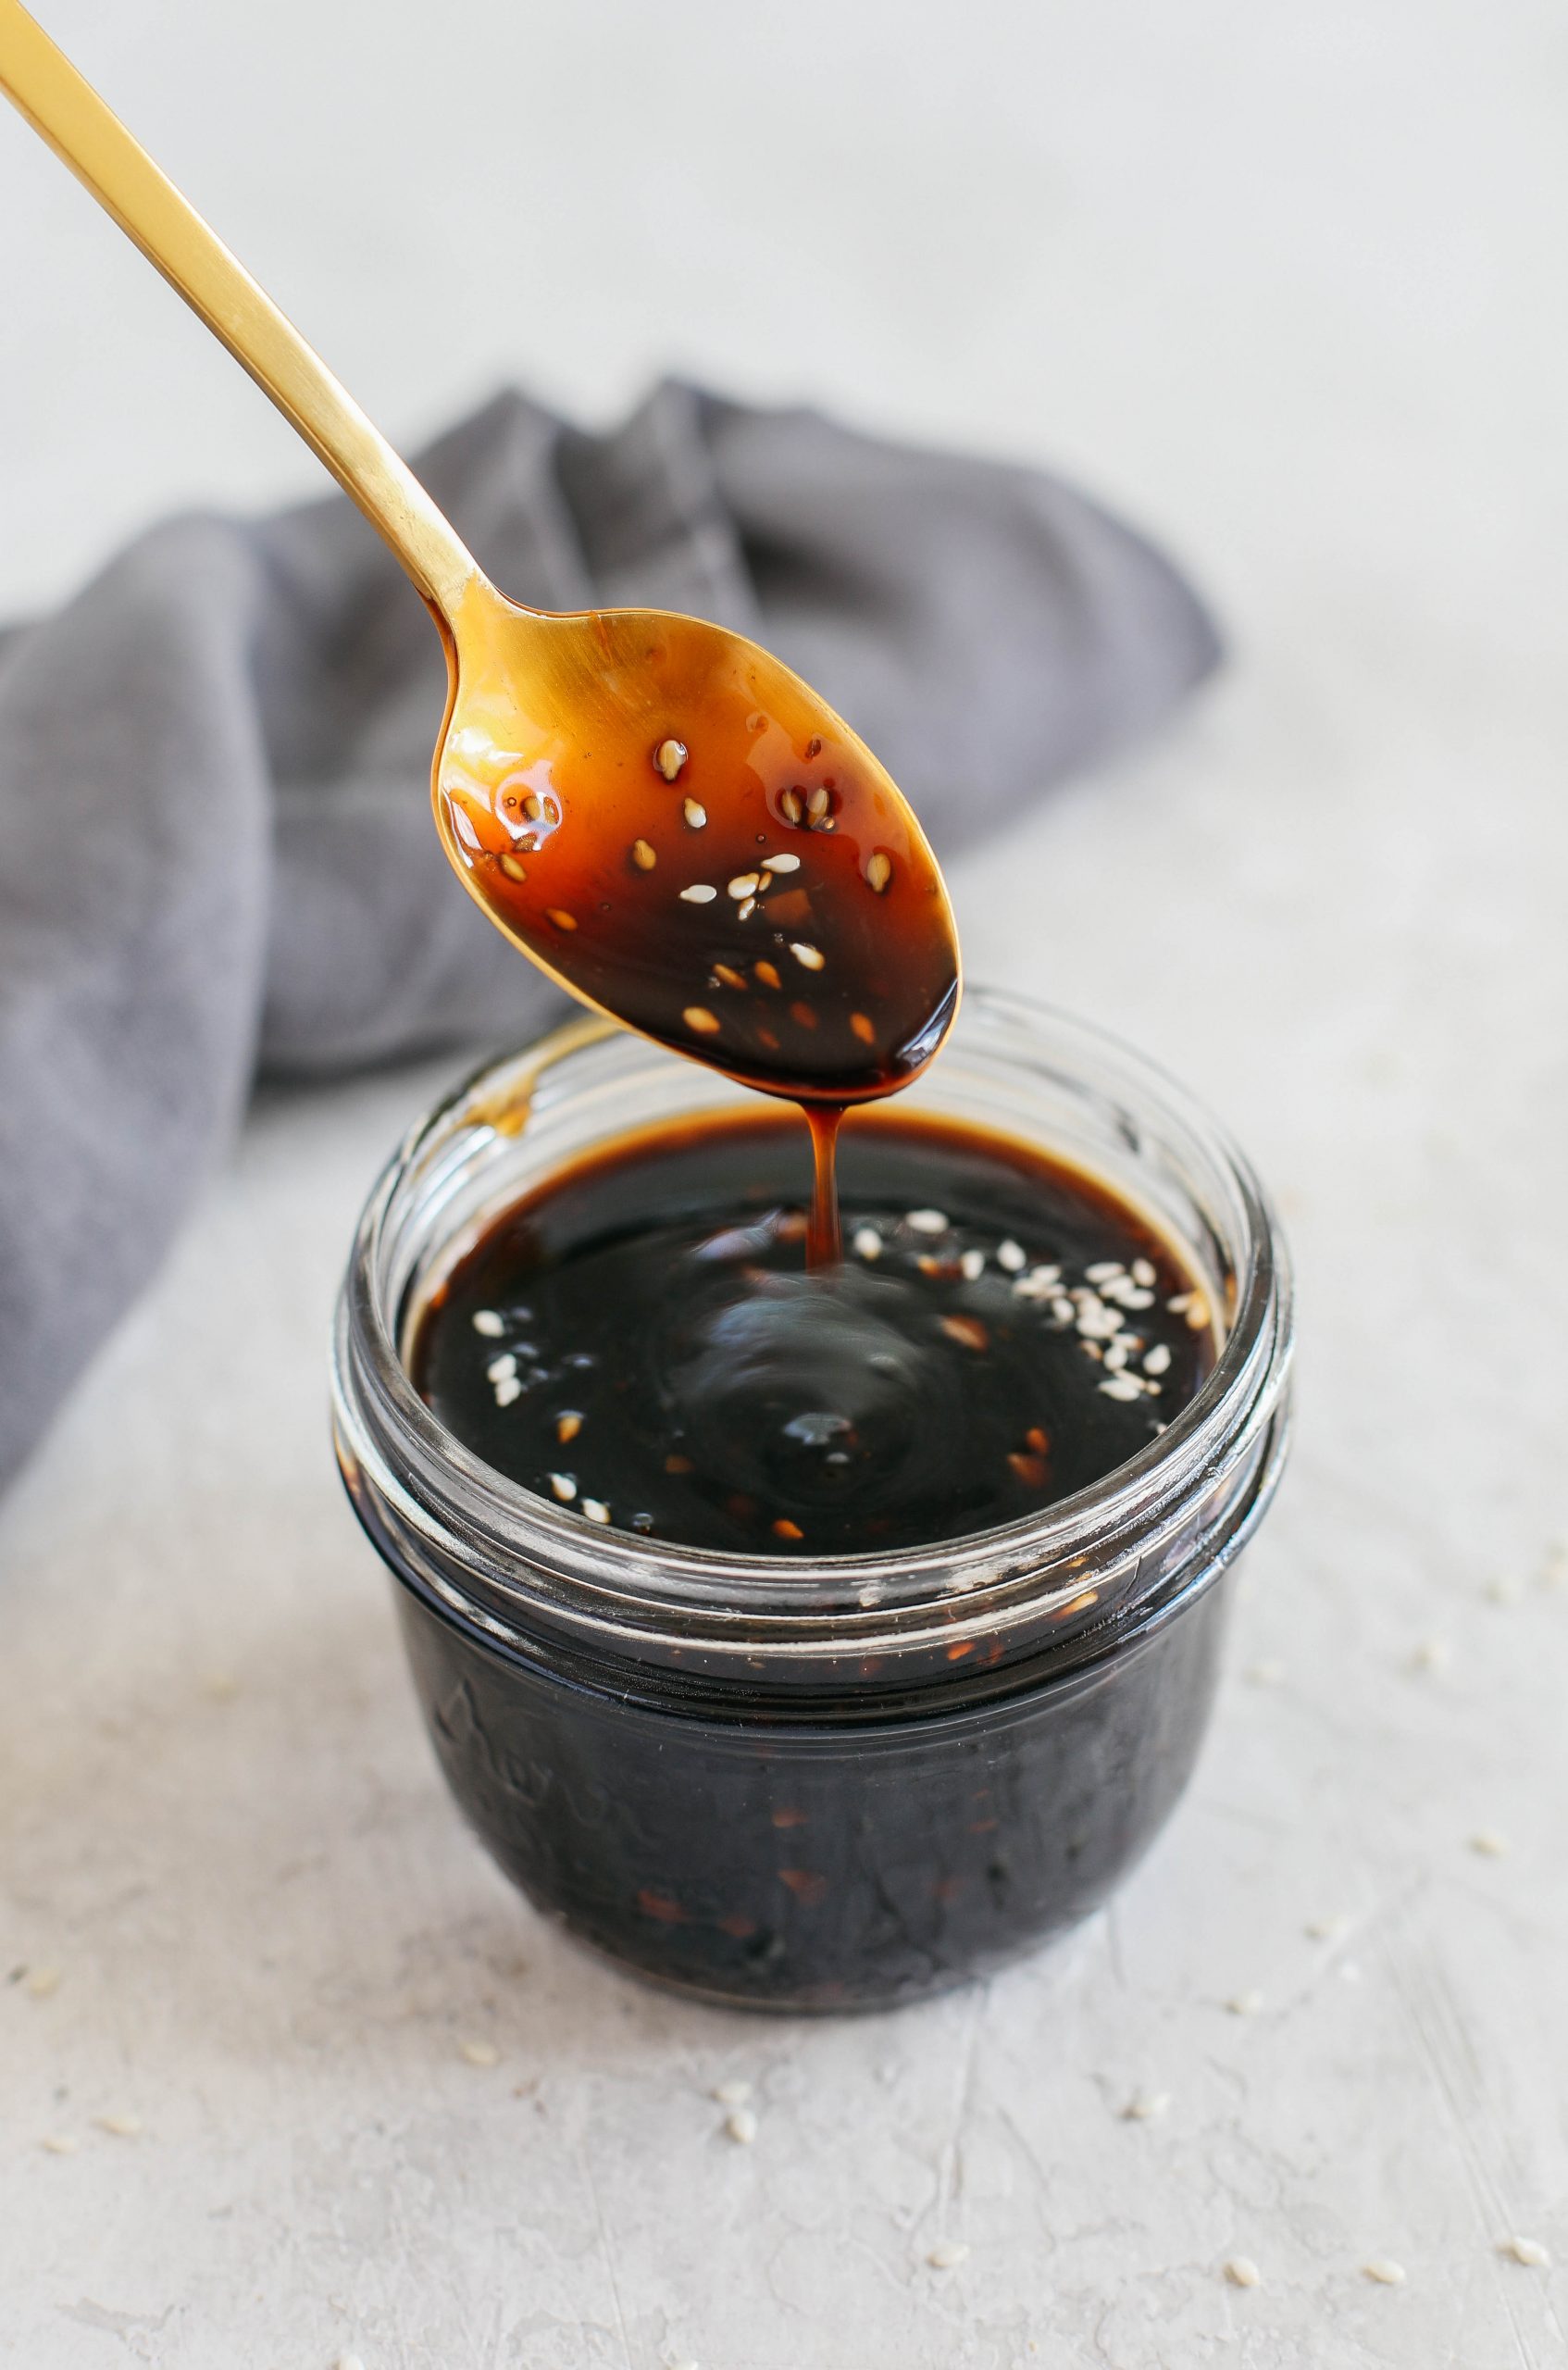 Skip store-bought and make this EASY Healthy Teriyaki Sauce that is sticky, sweet and made in just 5 minutes using fresh, simple ingredients!